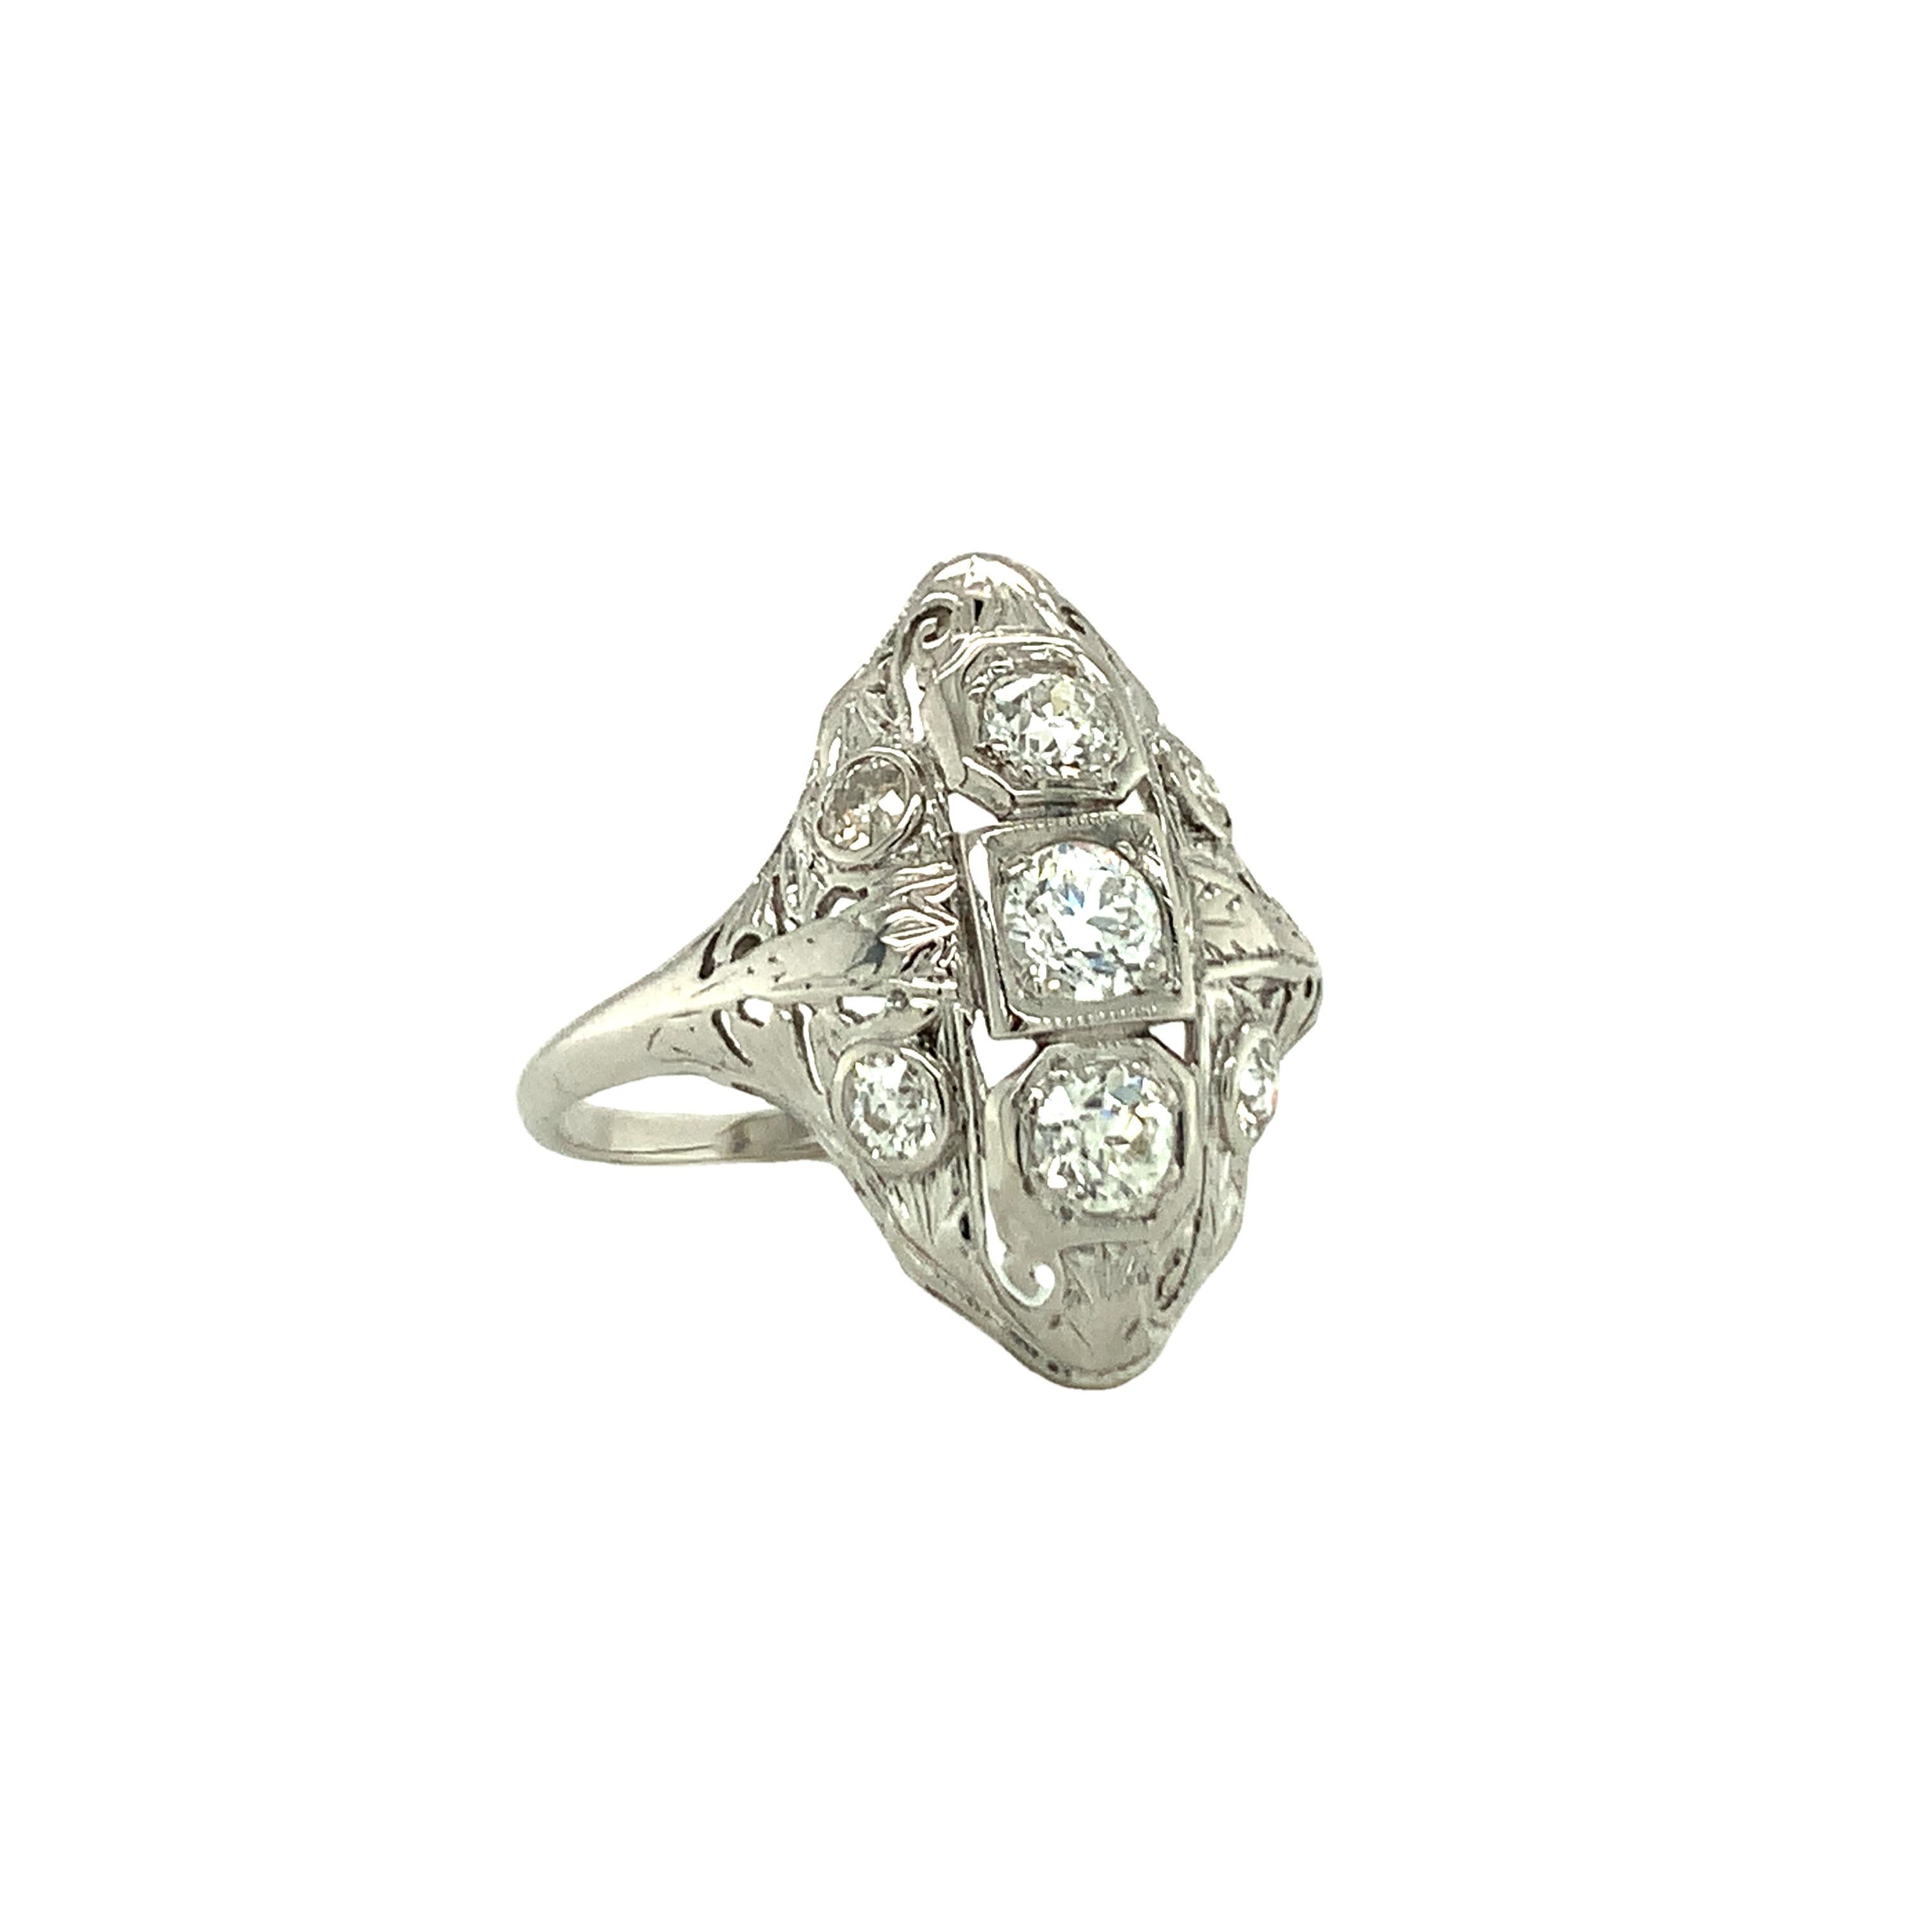 One Art Deco 14K white gold diamond filigree ring featuring seven bead set, old European cut diamonds totaling 0.64 ct. with L-M color and SI-1 clarity.  Measures 22 mm. long upon the finger.  

Vintage, hand-made, exquisite.  

Metal: 14K White